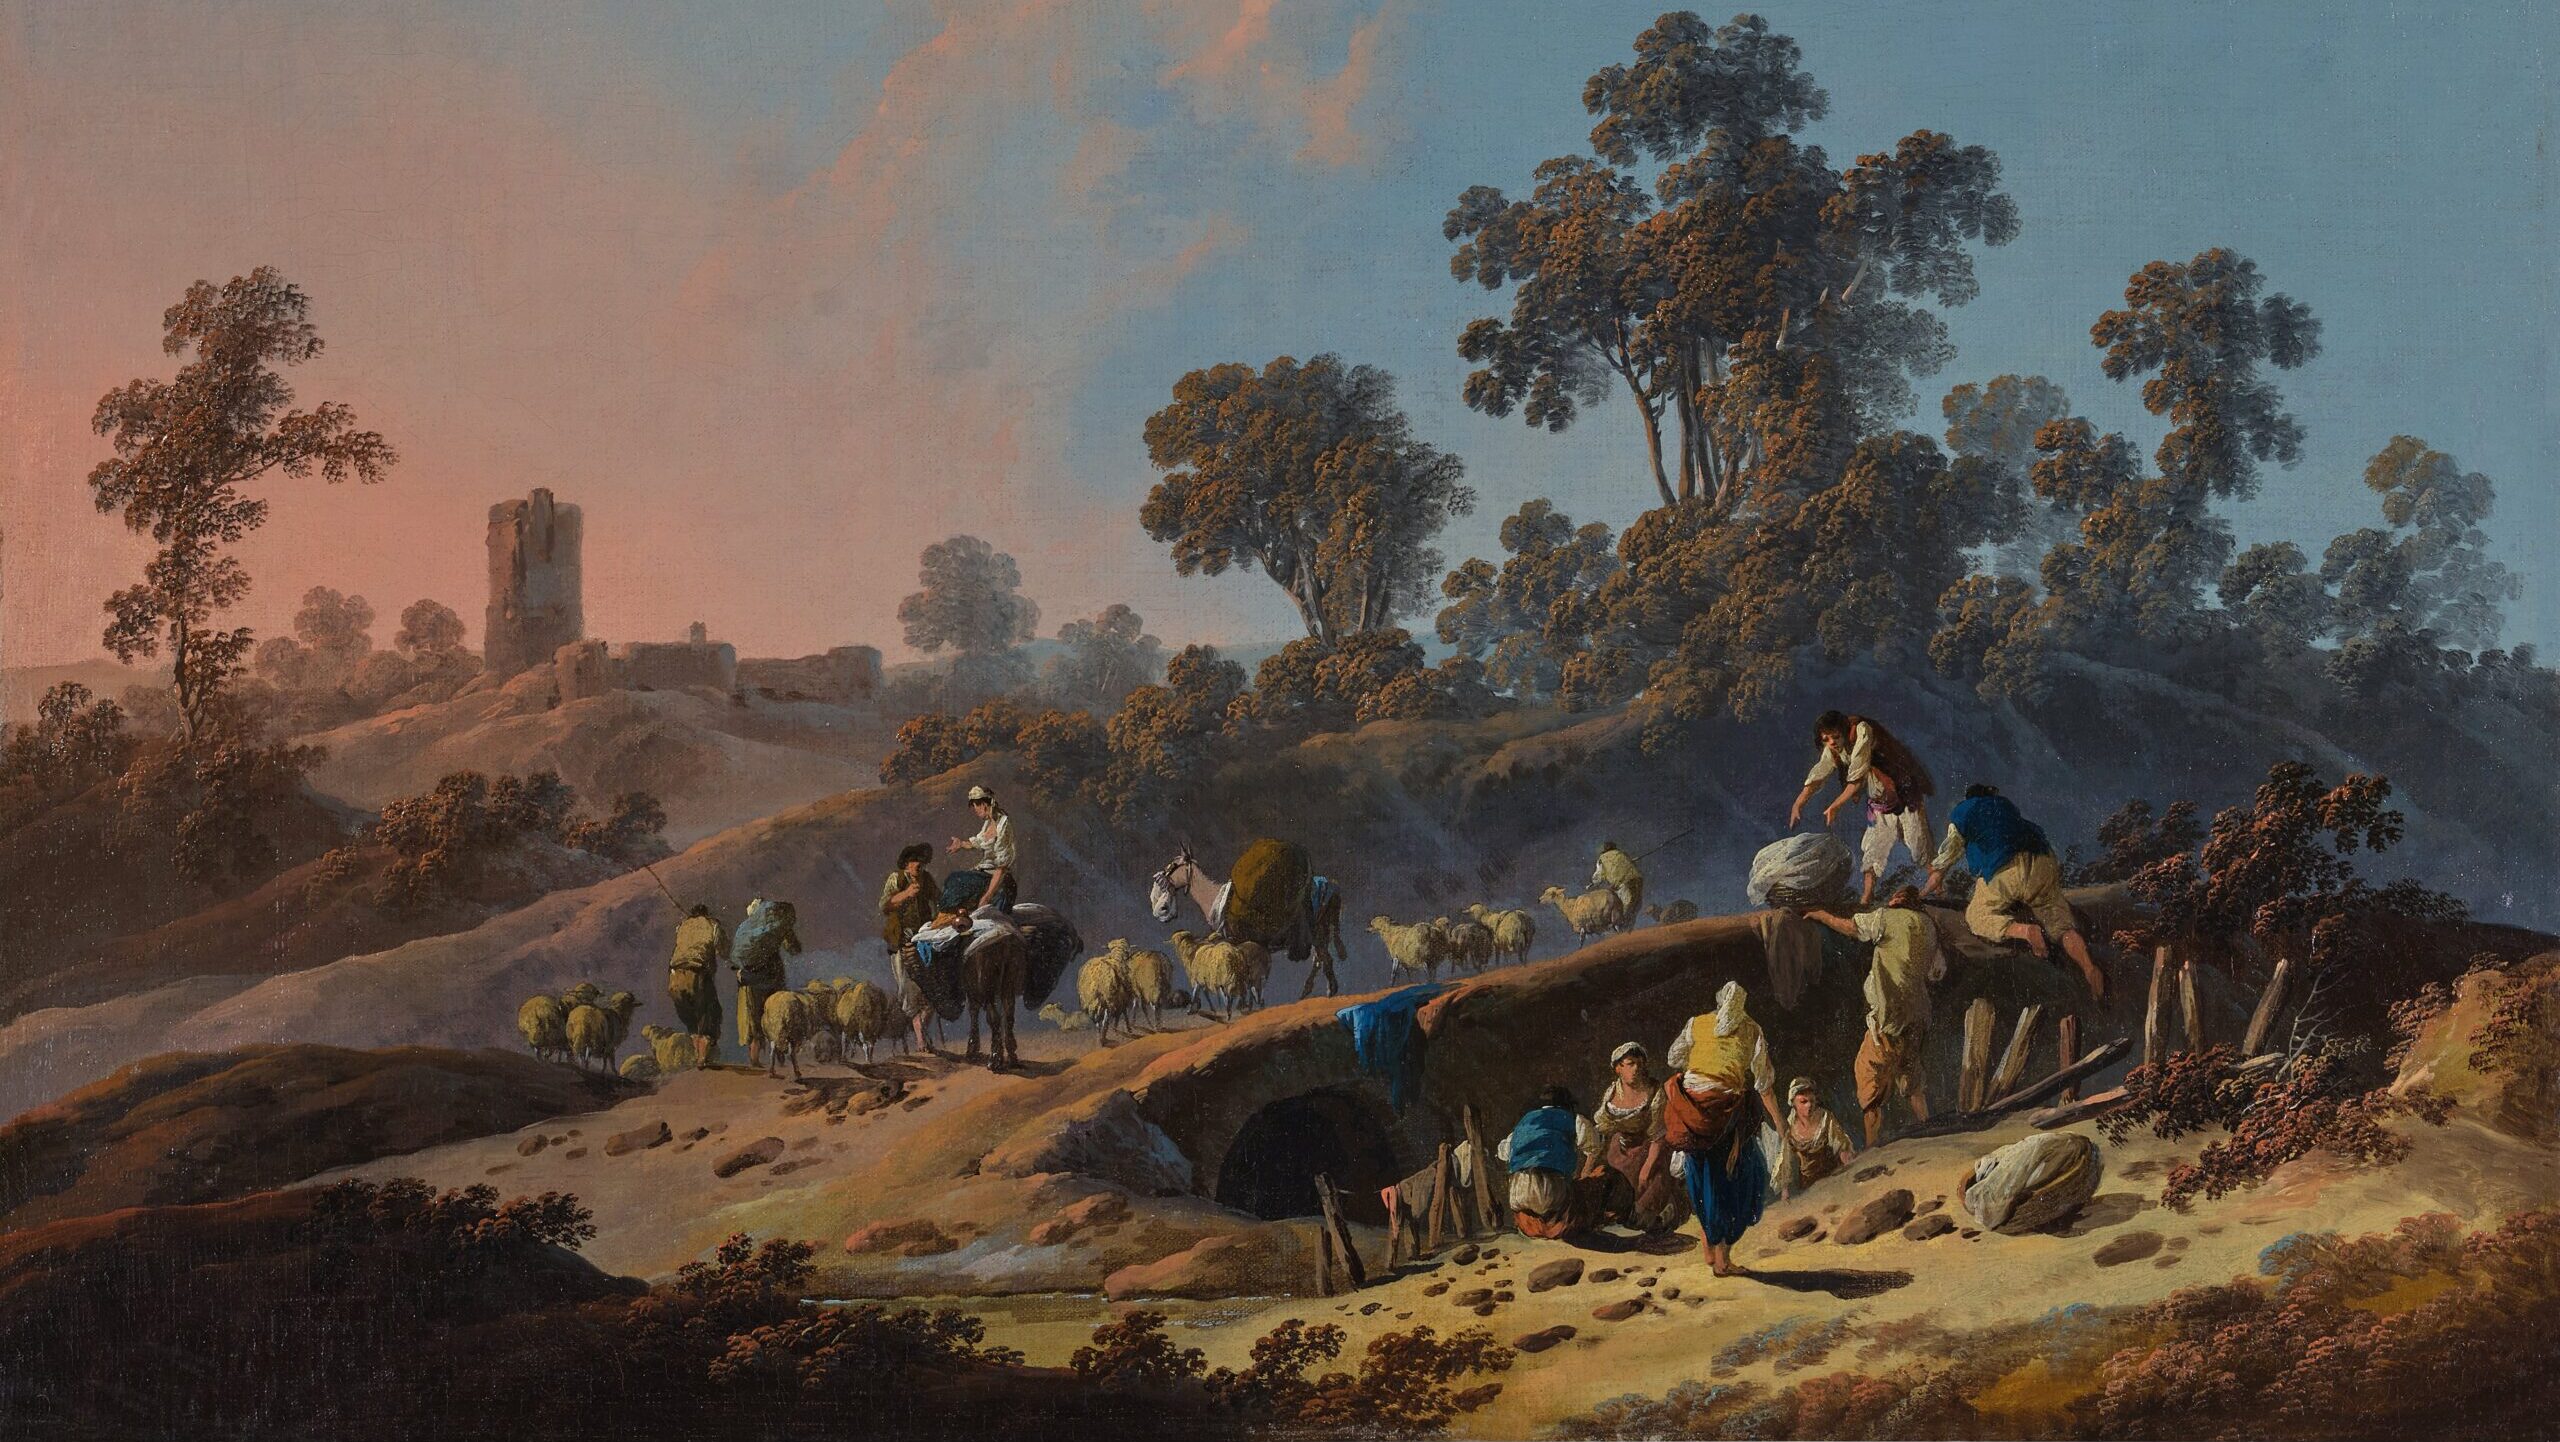 Picture by Jean-Baptiste Pillement called Villagers in a Southern Landscape